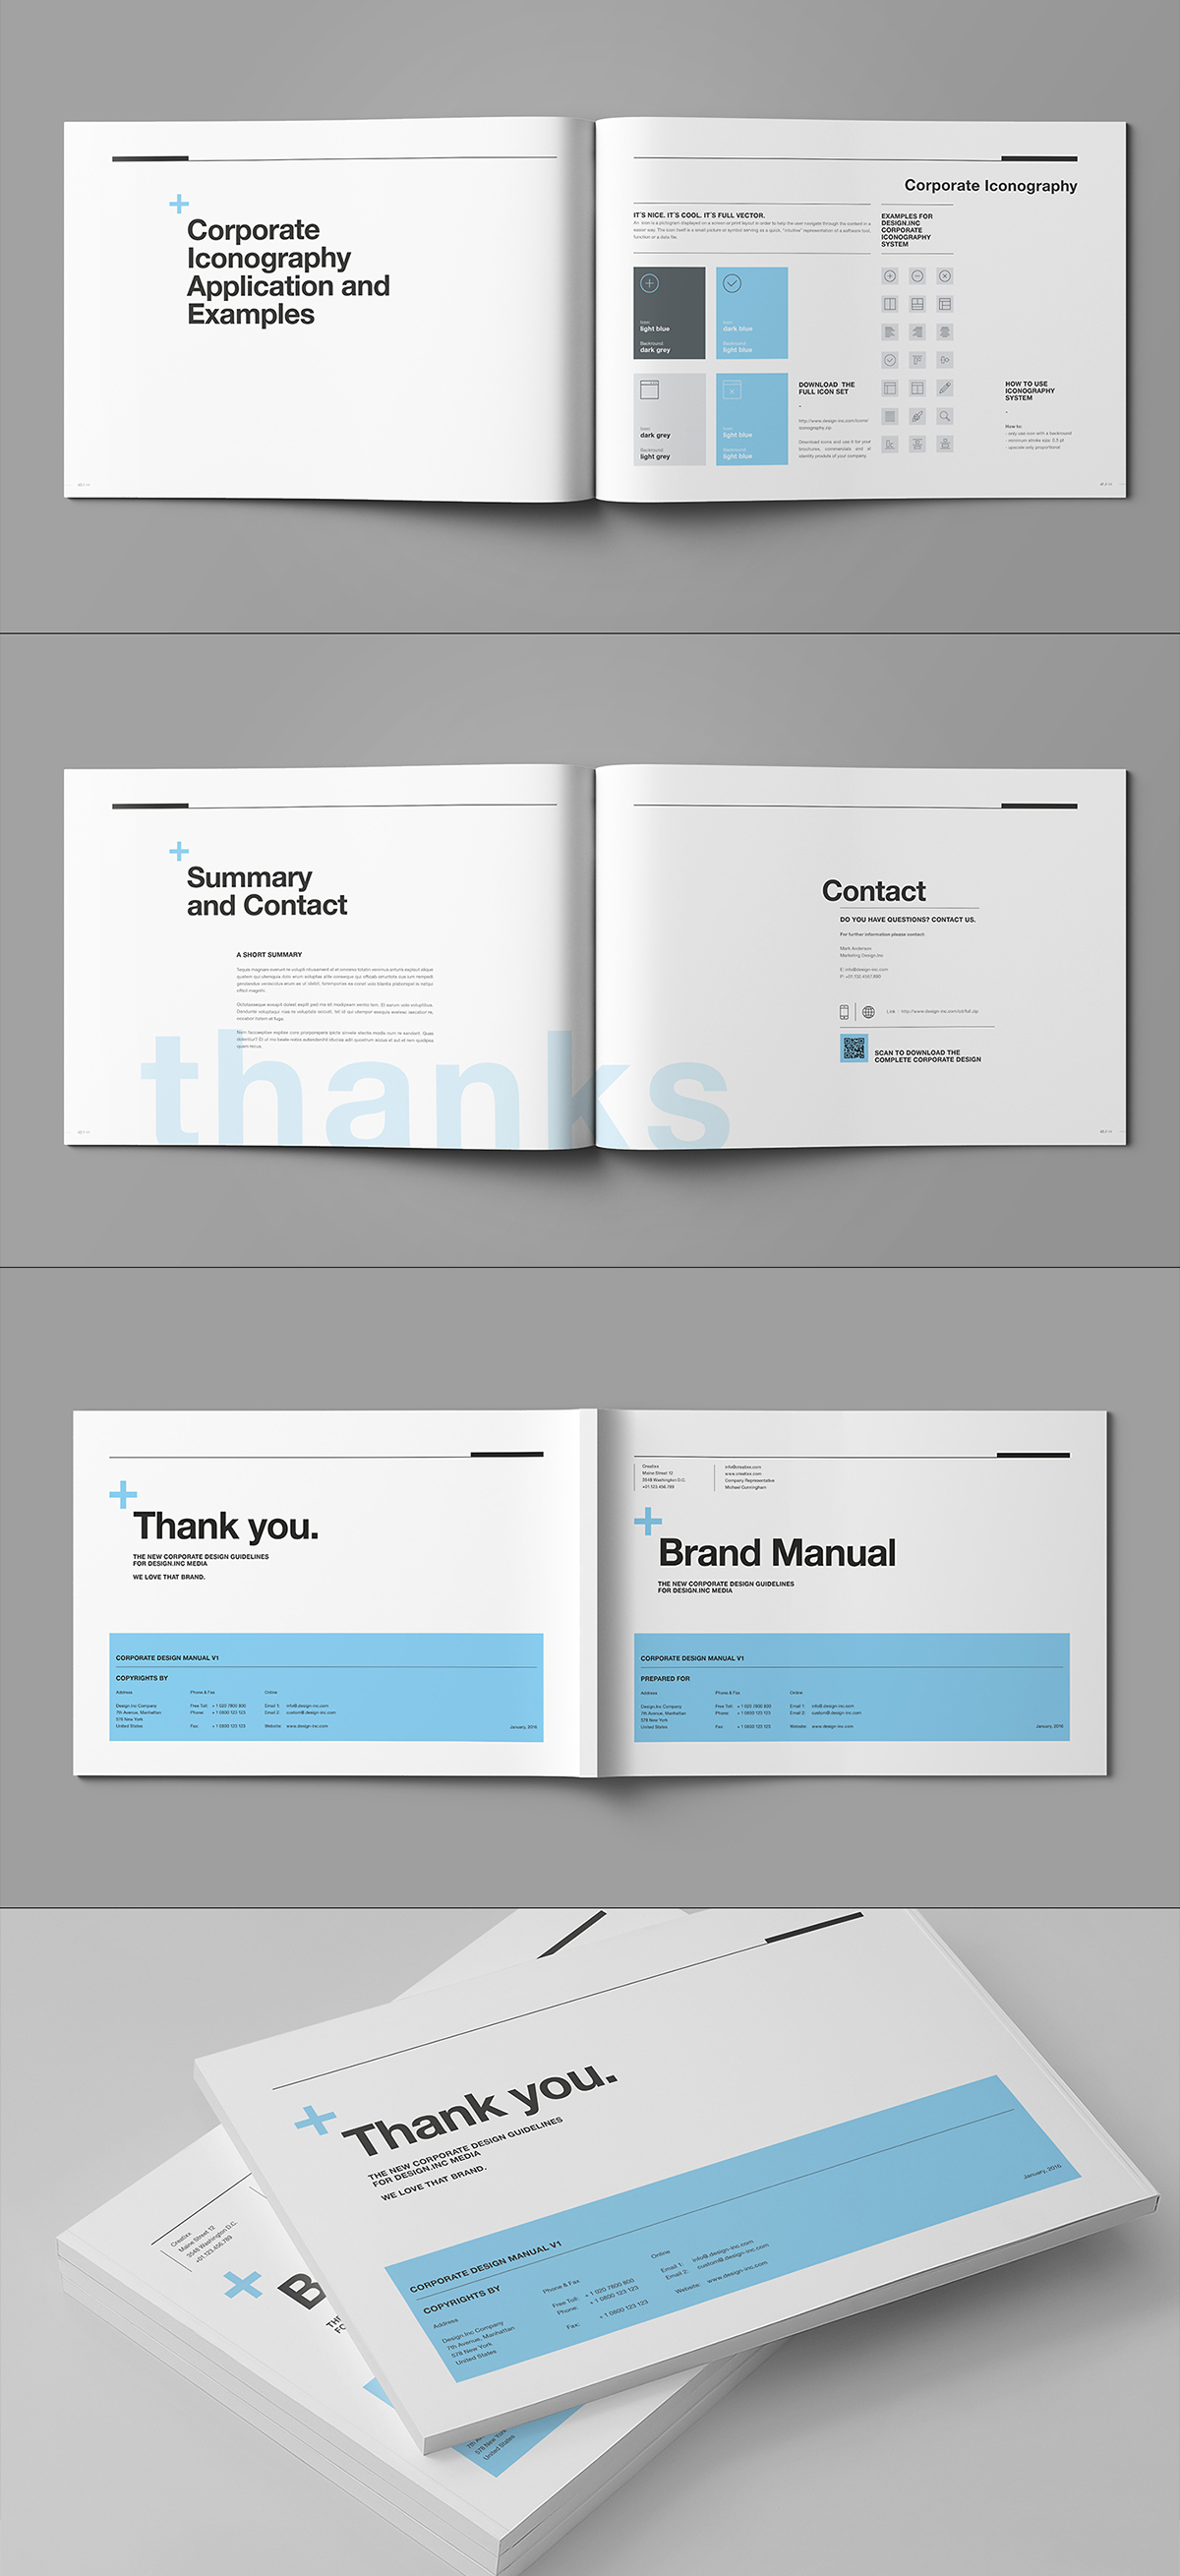 a4 brand brand guide brand manual Manual Guides brandbook colors corporate identity egotype Guide guidelines horizontal Landscape